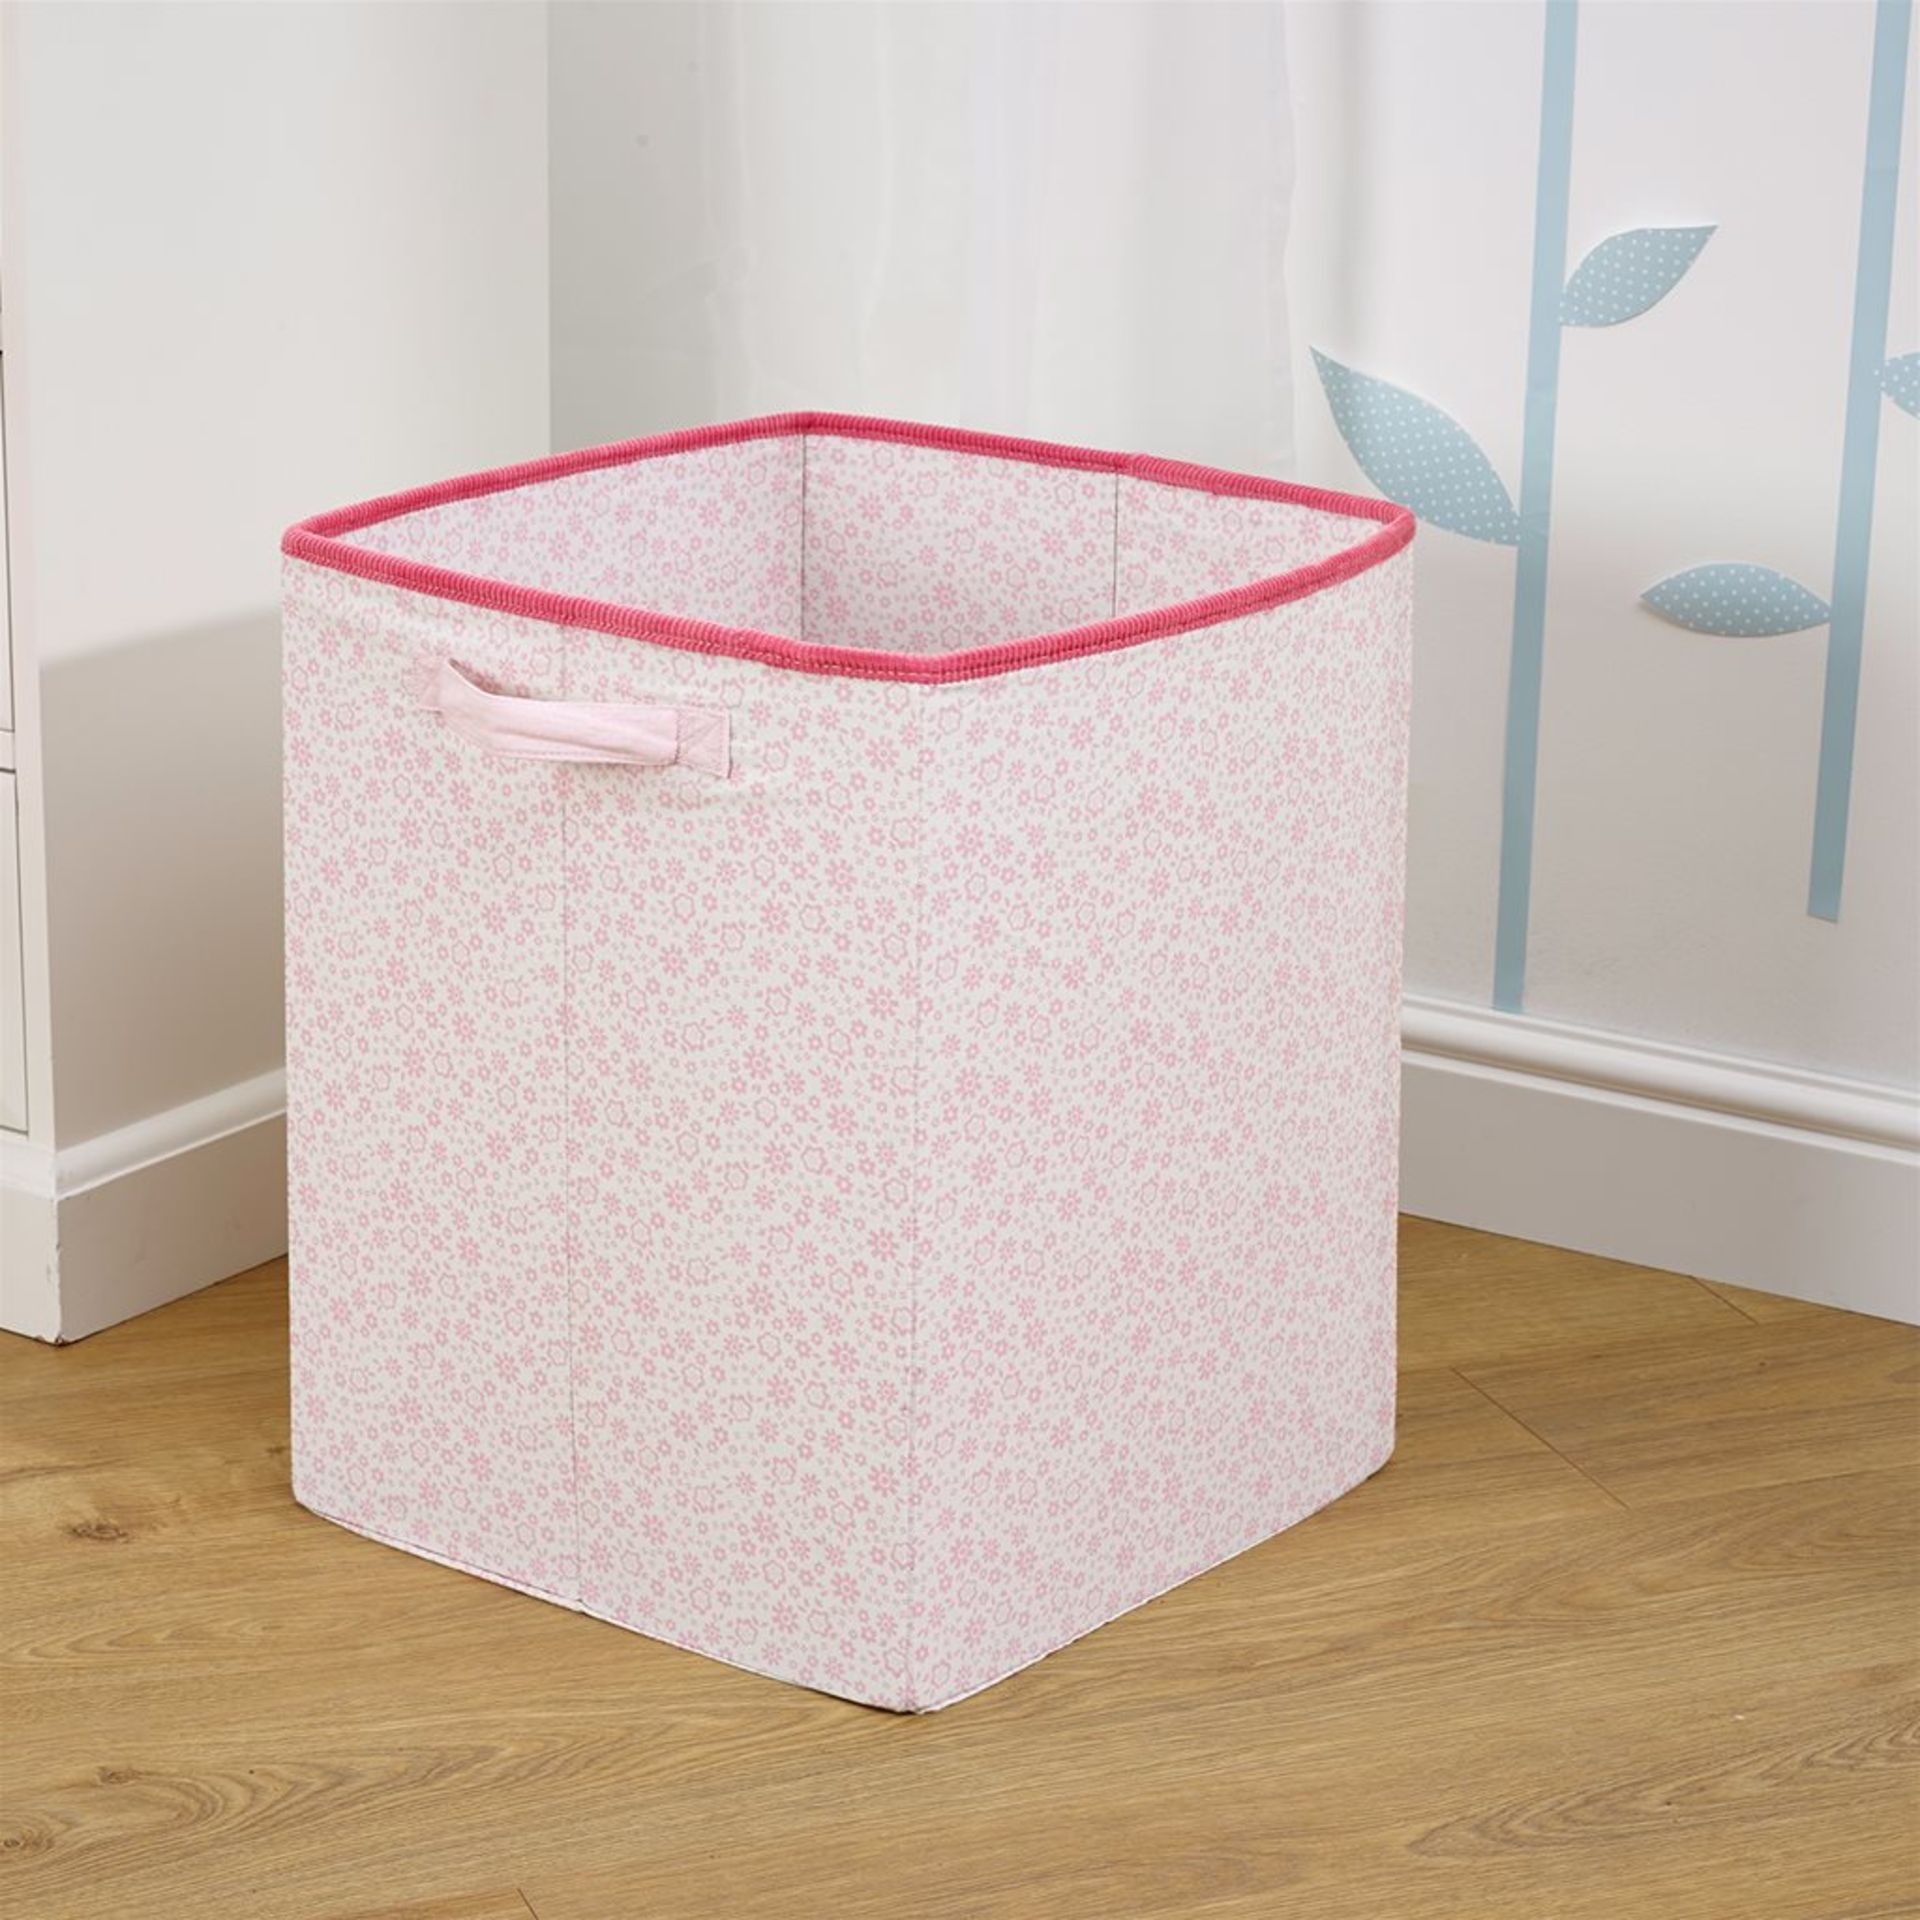 50 sets Beyond the Meadow Girls Storage Hamper/Toy Box/Laundry Basket (Pink)